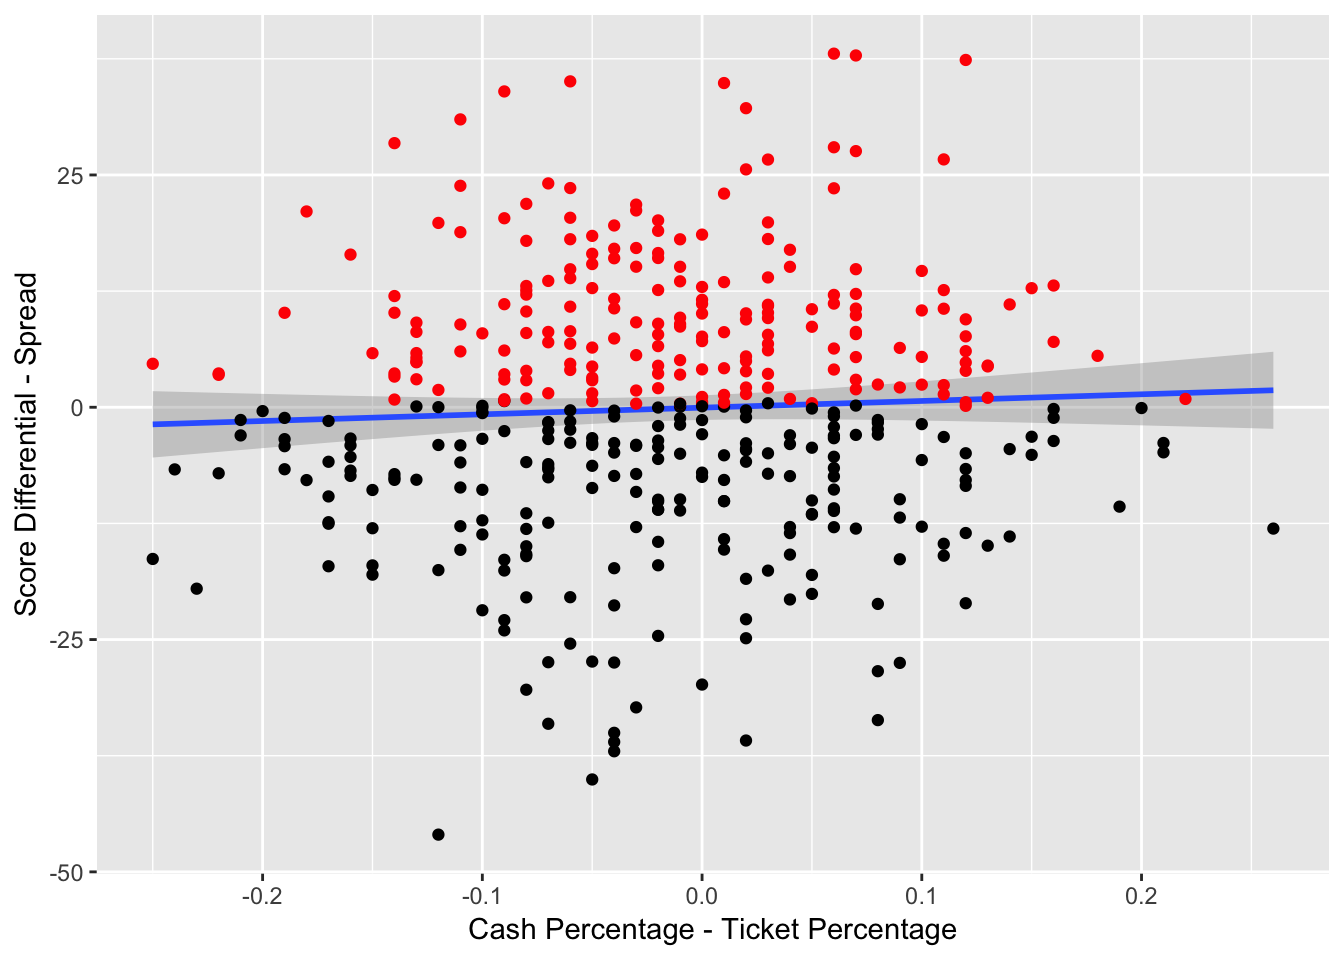 Result Against Spread vs. Cash-Ticket Percentage Difference -- The red indicates that the team has beat the spread and the black indicates that the team has failed to beat the spread